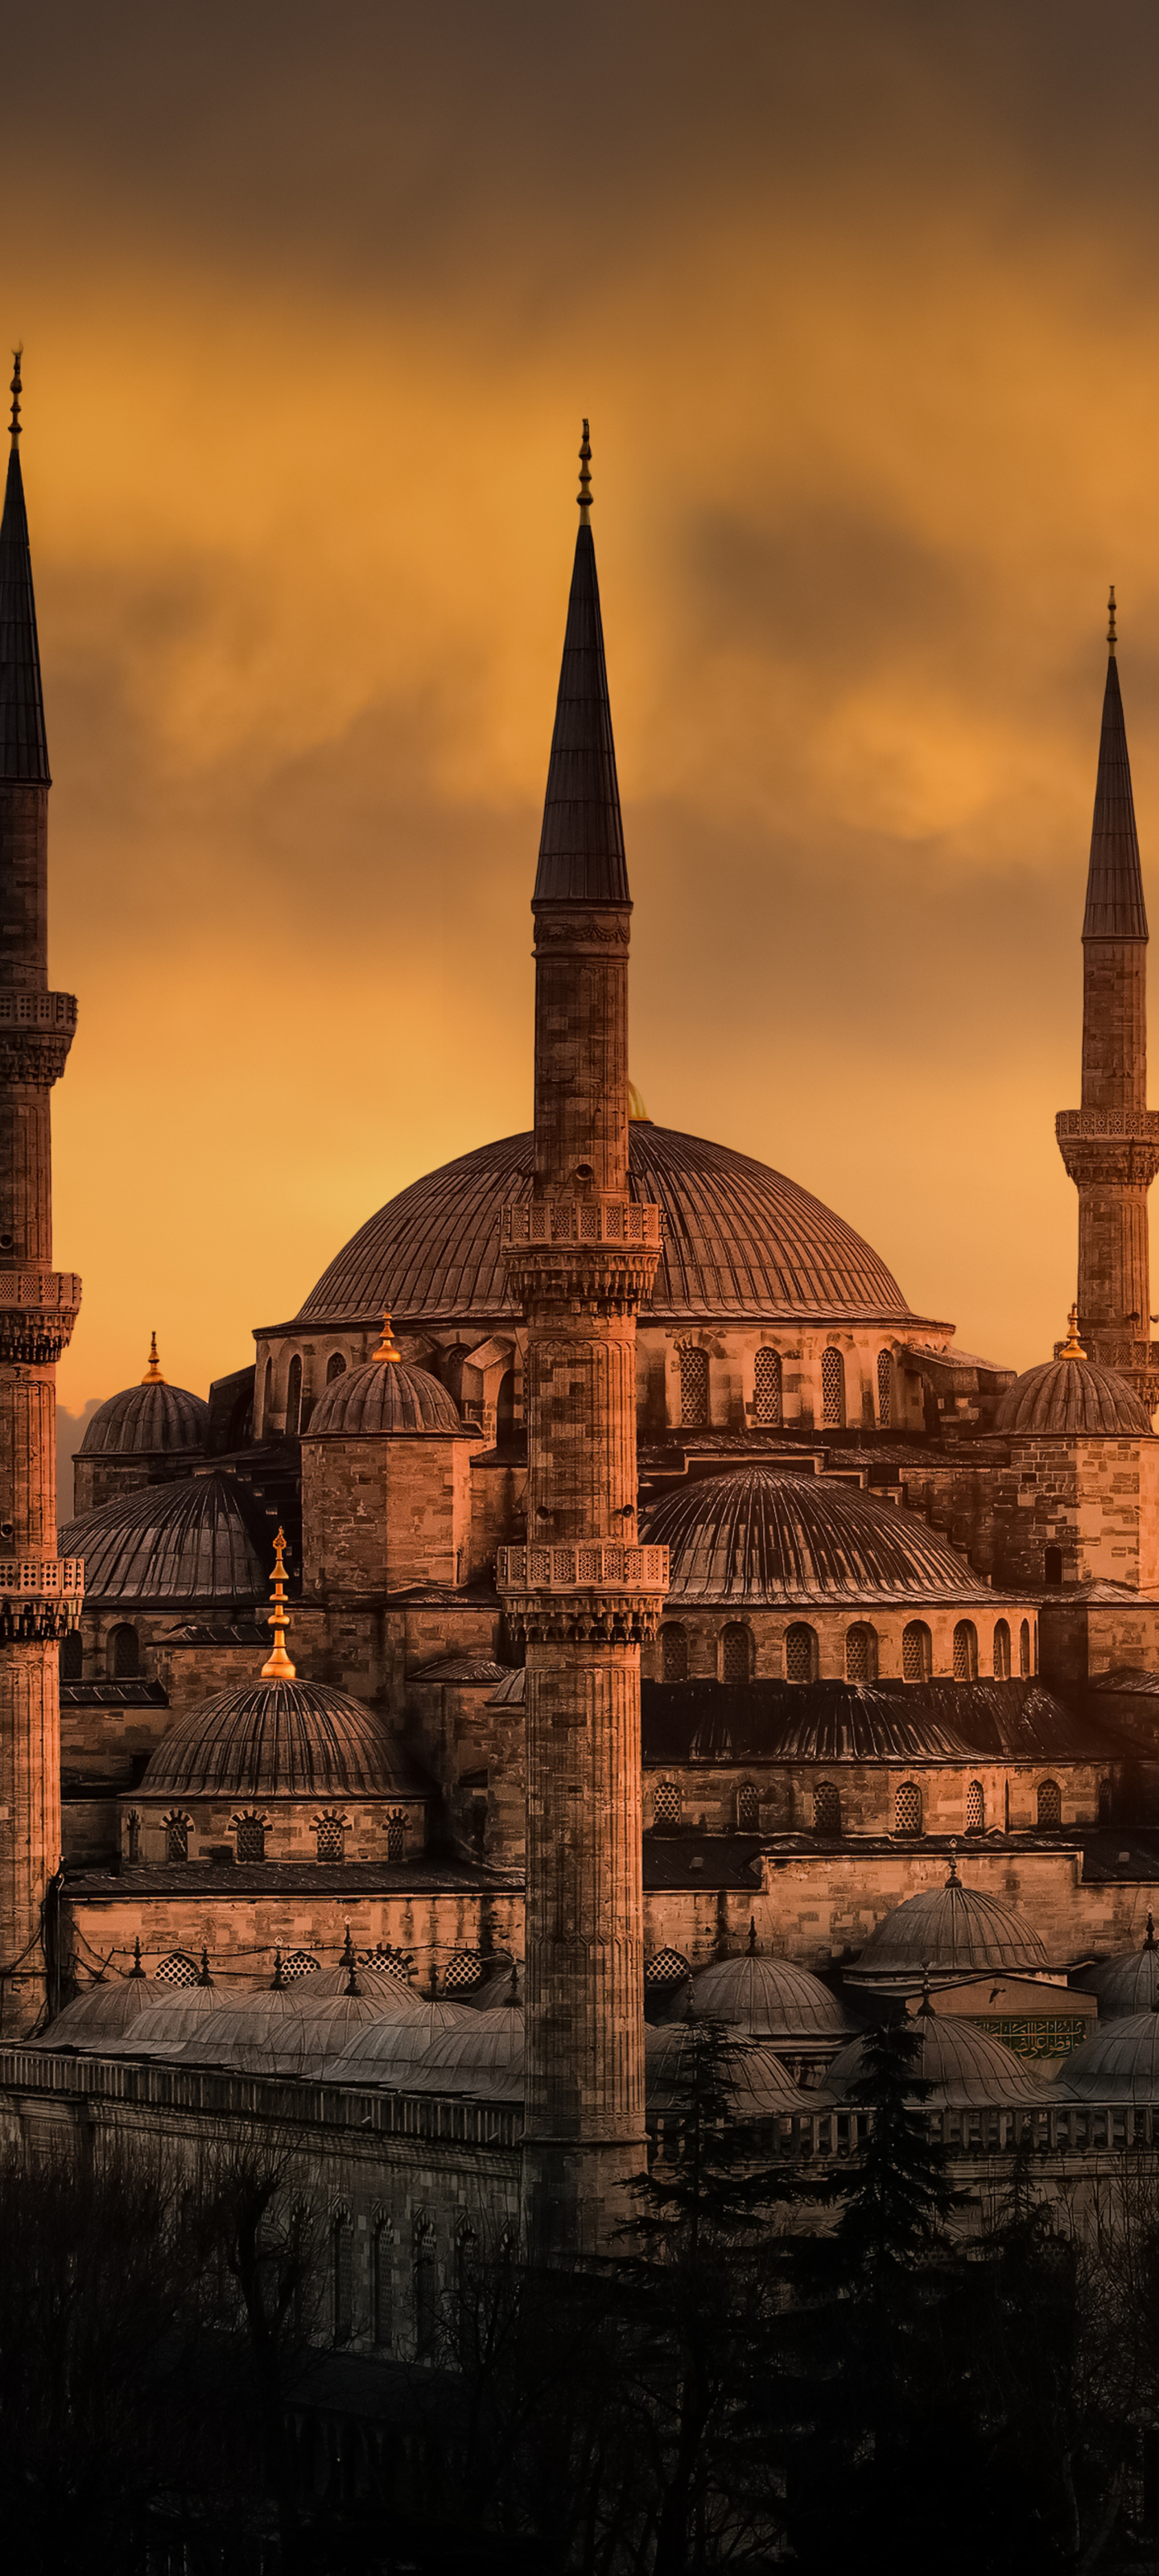 Sultan Ahmed Mosque Istanbul, Turkey